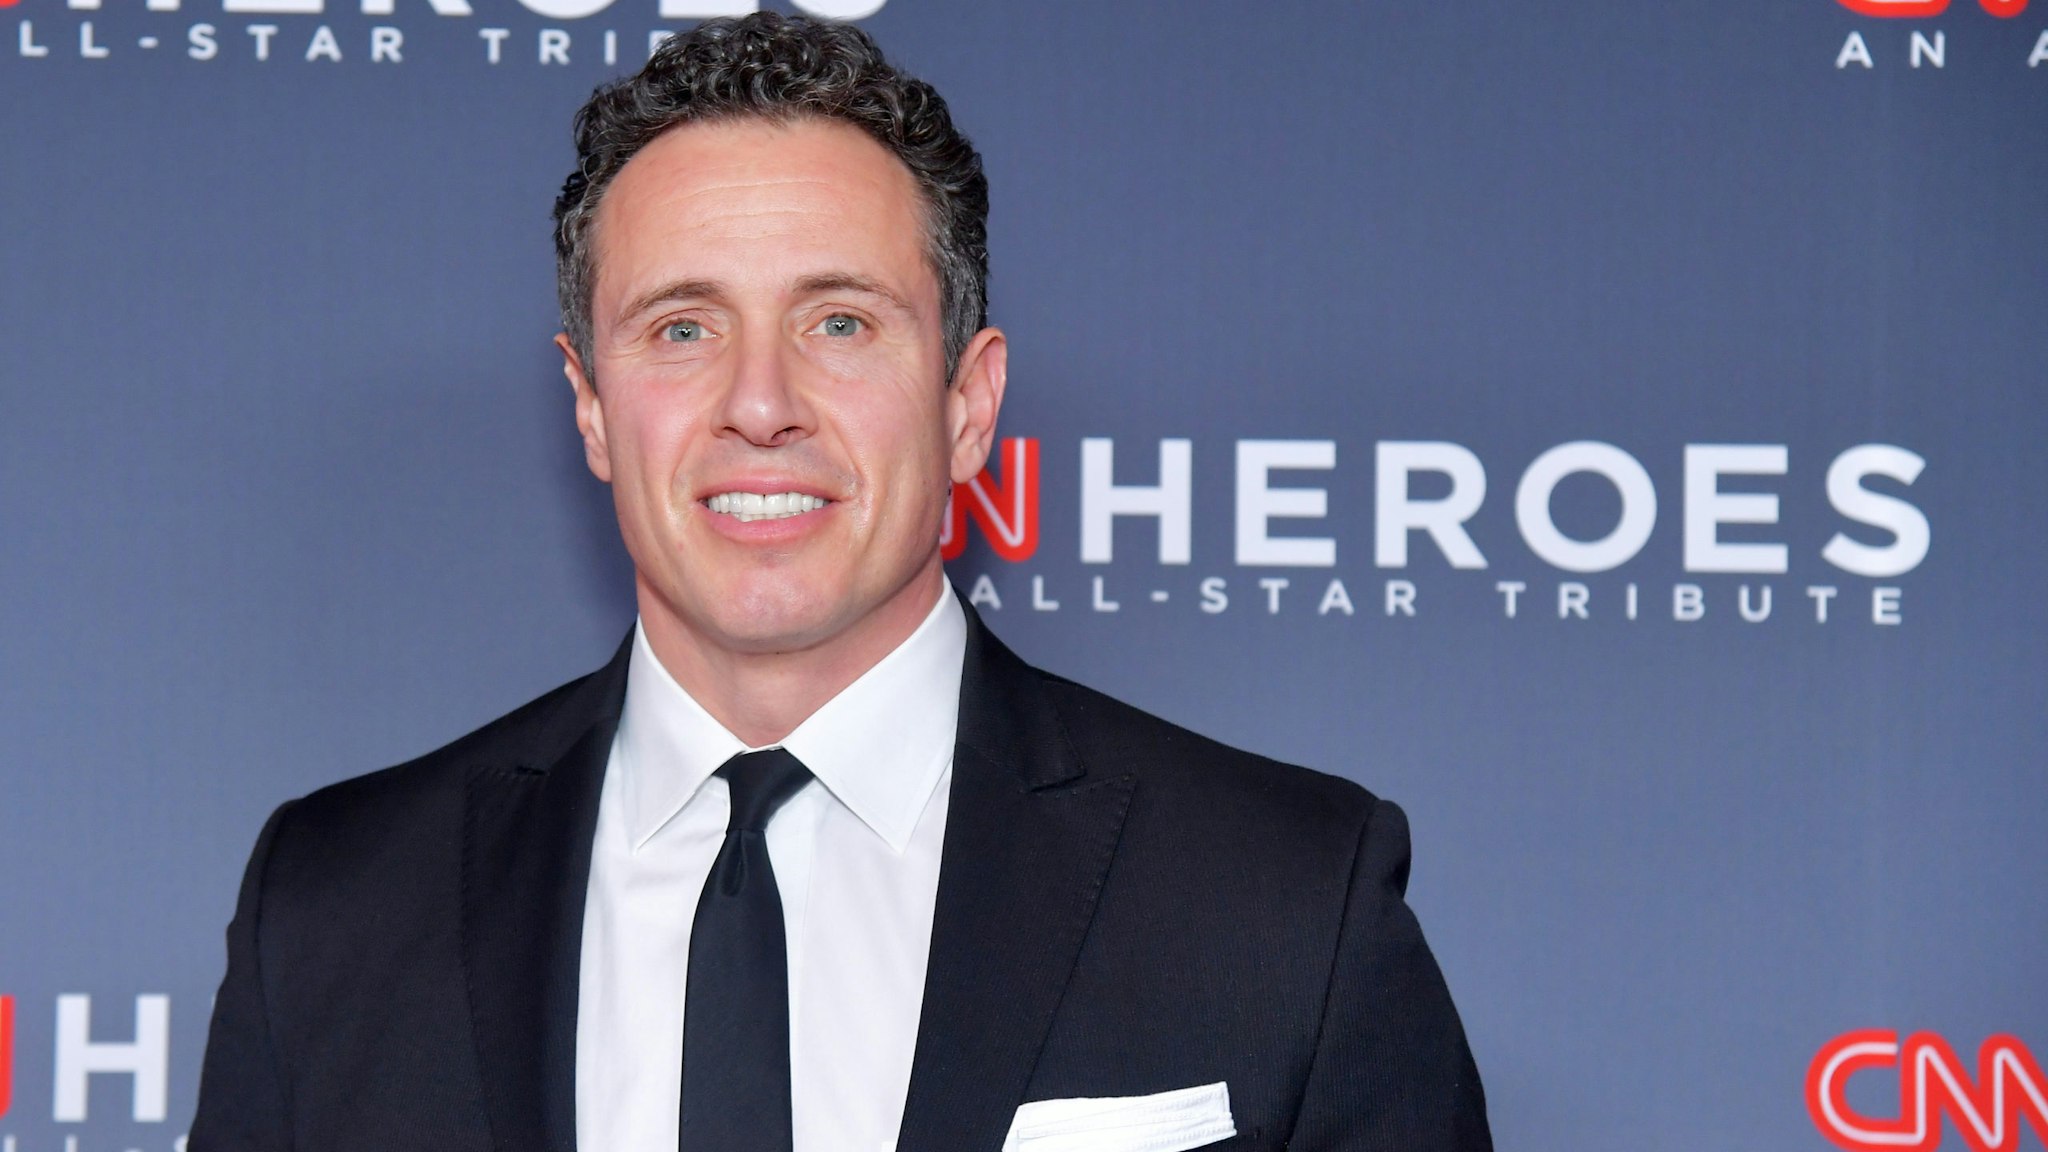 NEW YORK, NY - DECEMBER 09: Chris Cuomo attends the 12th Annual CNN Heroes: An All-Star Tribute at American Museum of Natural History on December 9, 2018 in New York City.